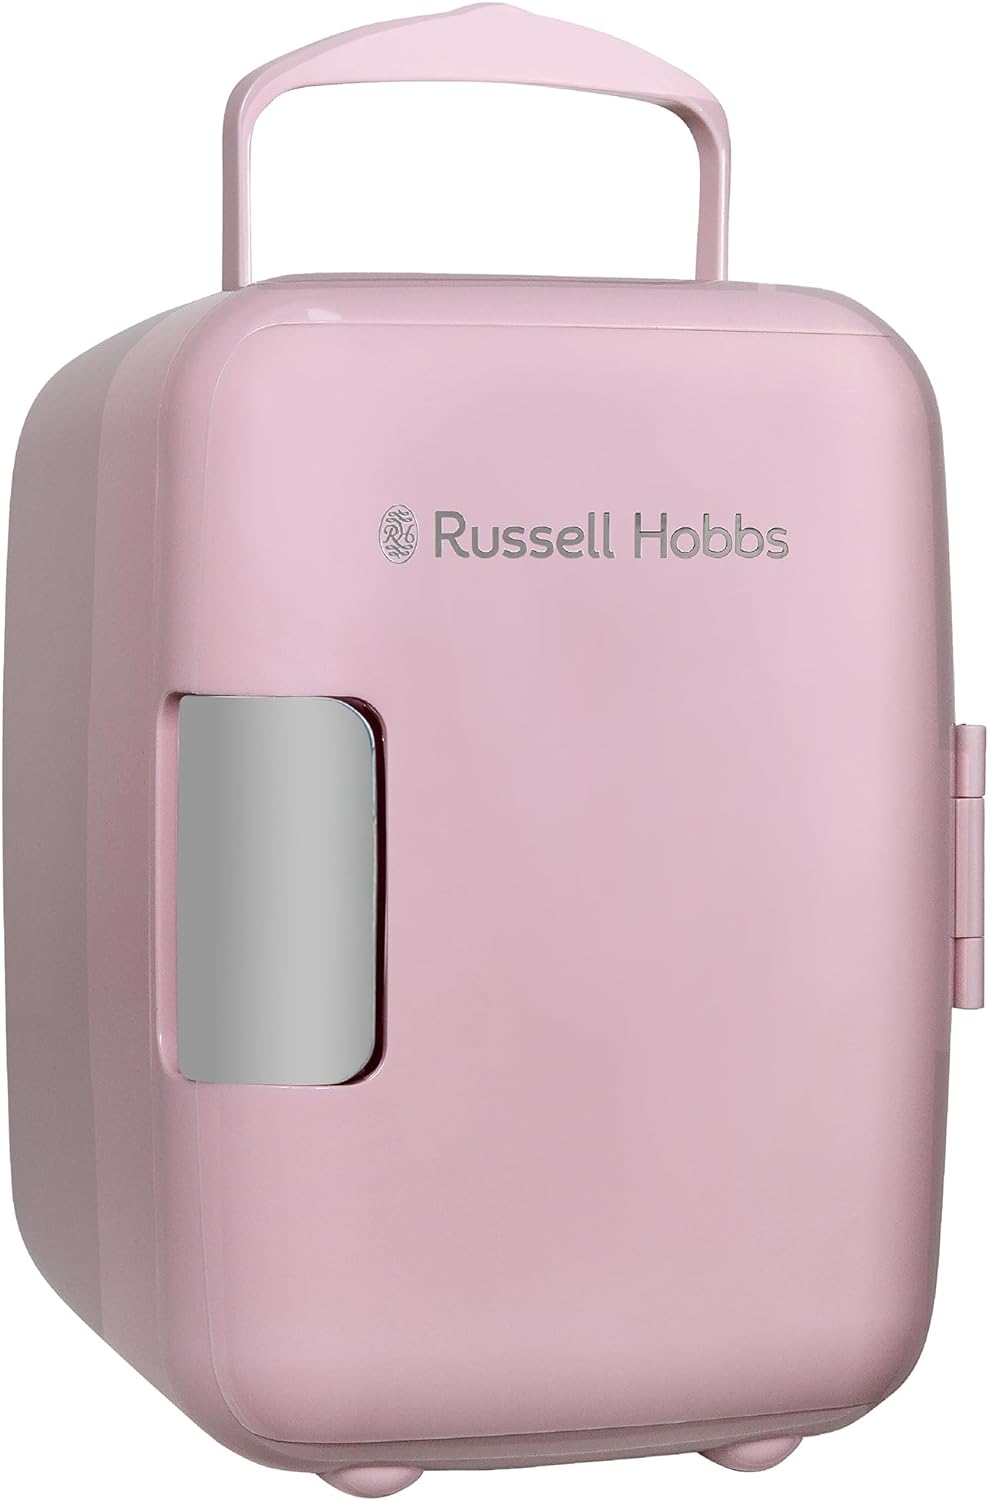 Russell Hobbs Mini Cooler RH4CLR1001B 4L/6 Can Portable Mini Cooler & Warmer for Drinks, Cosmetics/Makeup/Skincare, AC/DC Power, Retro Style, Black, For Bedroom, Home, Caravan, Car - Amazing Gadgets Outlet